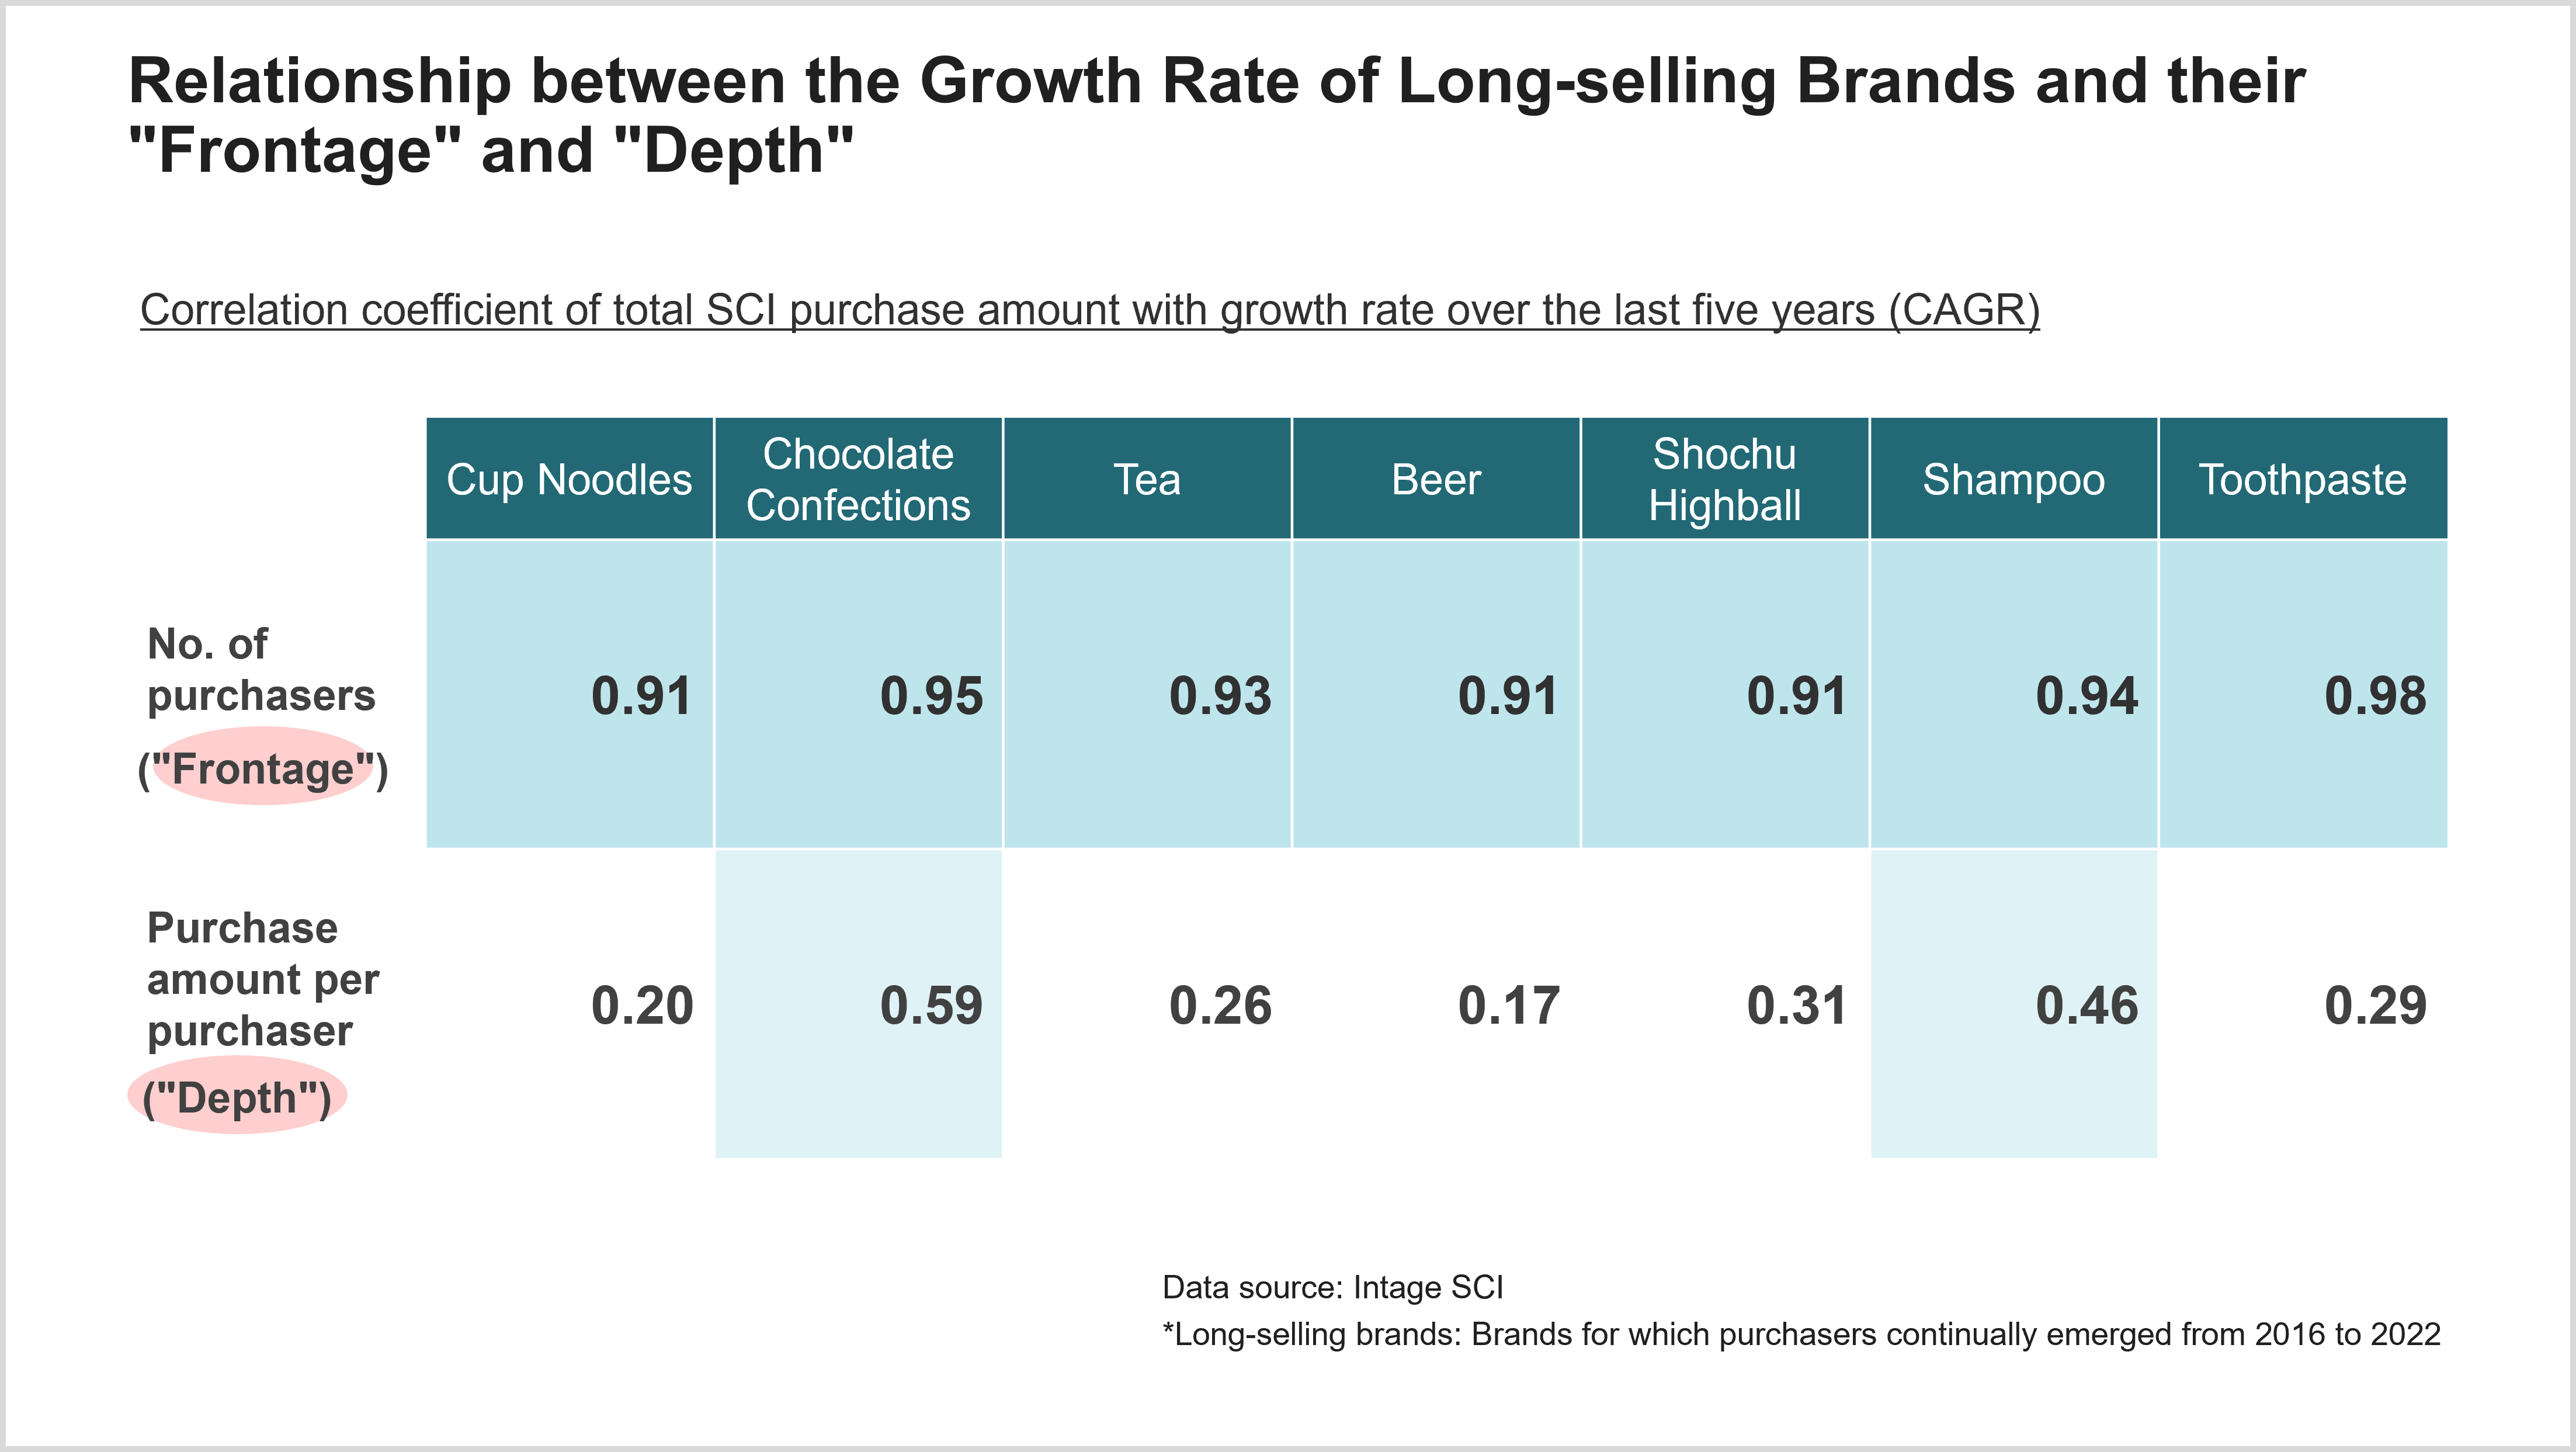 Relationship between the Growth Rate of Long-selling Brands and their "Frontage" and "Depth"